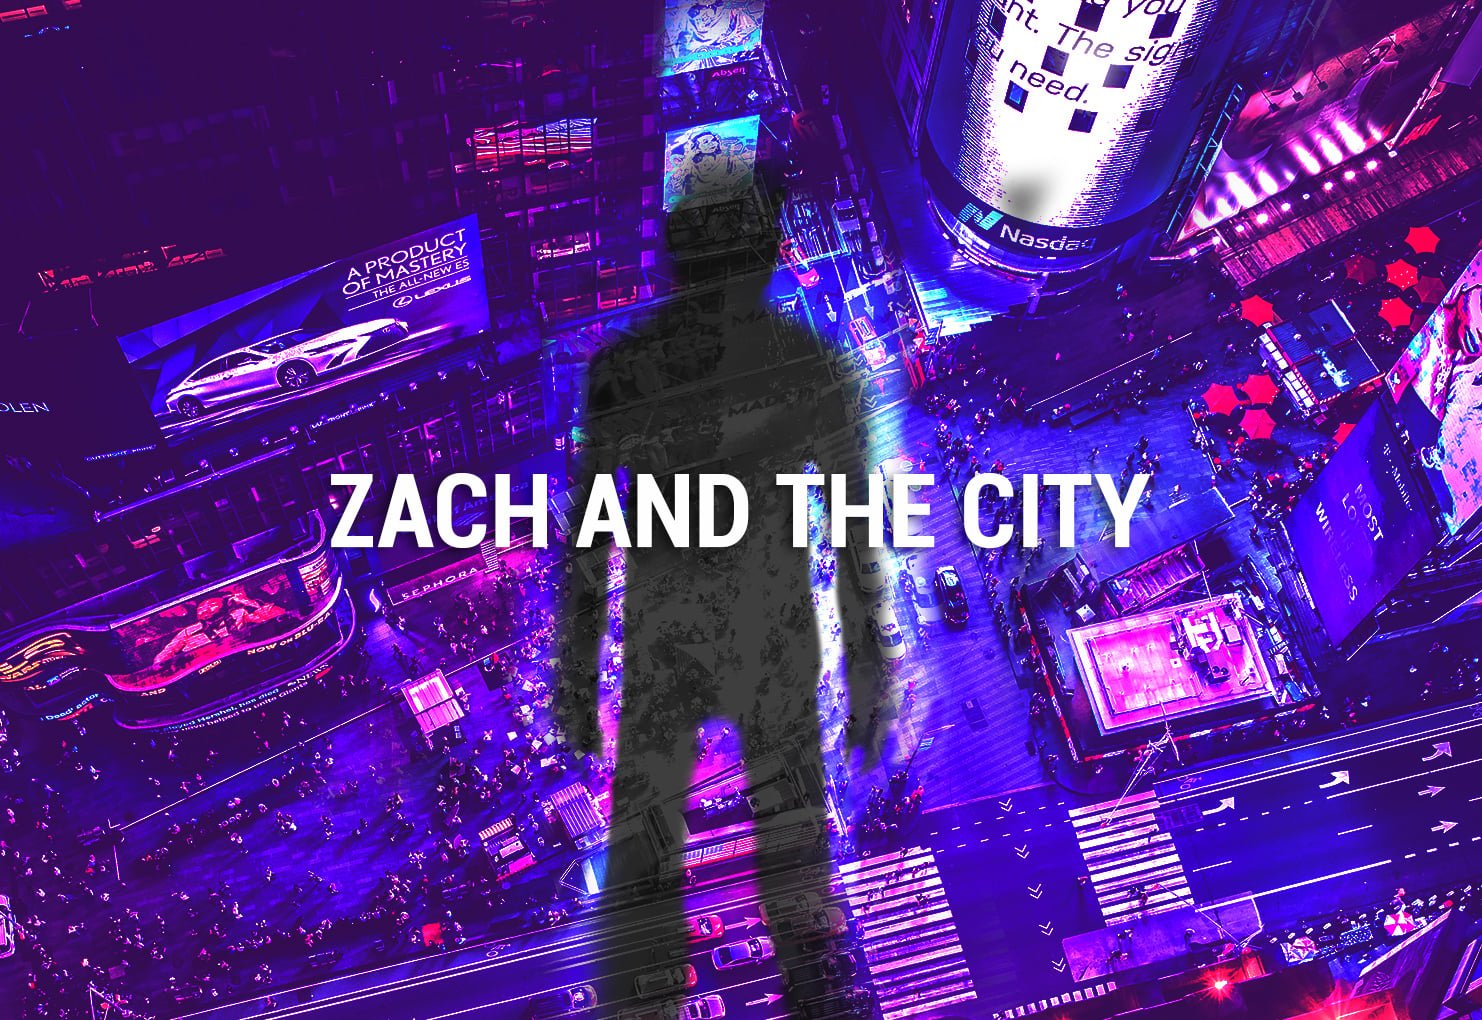 Zach and the city.jpg